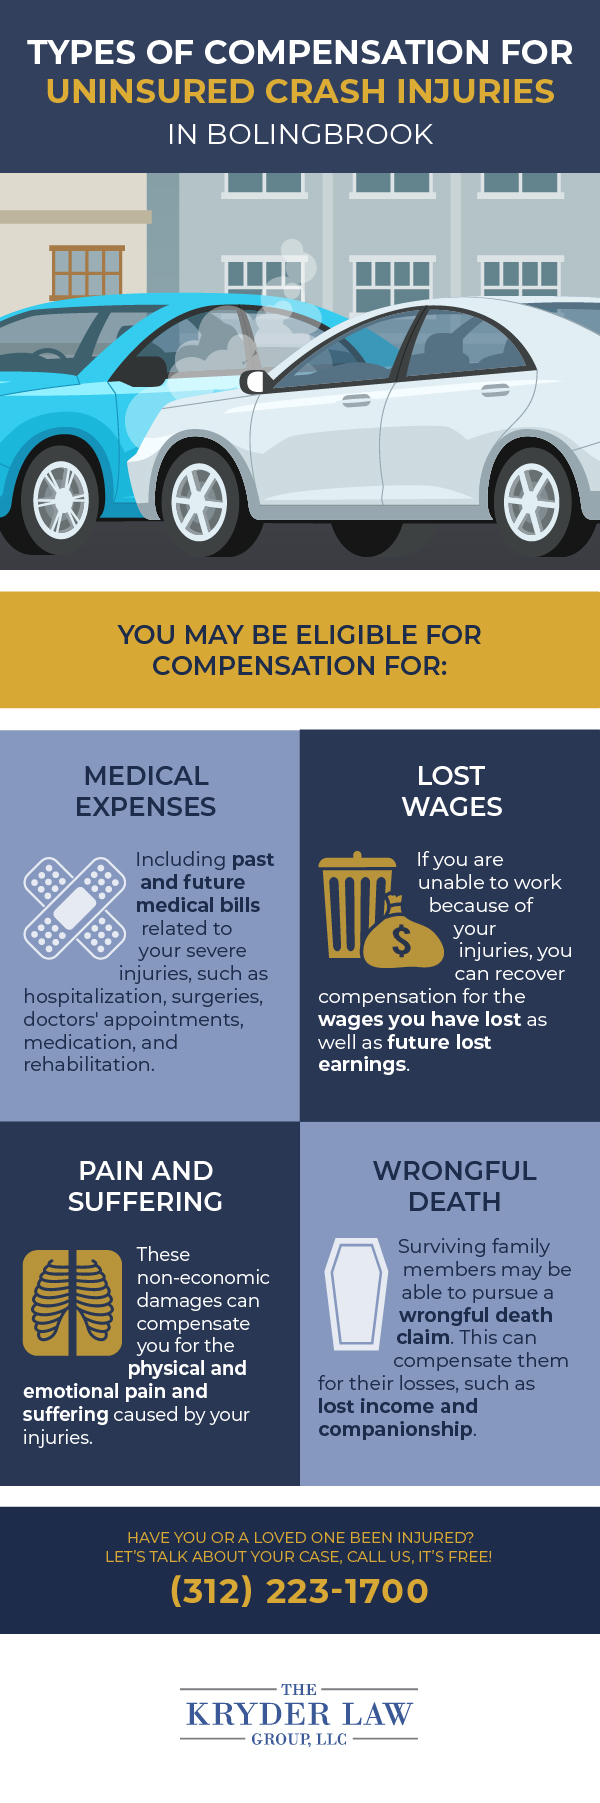 Types of Compensation for Uninsured Crash Injuries in Bolingbrook